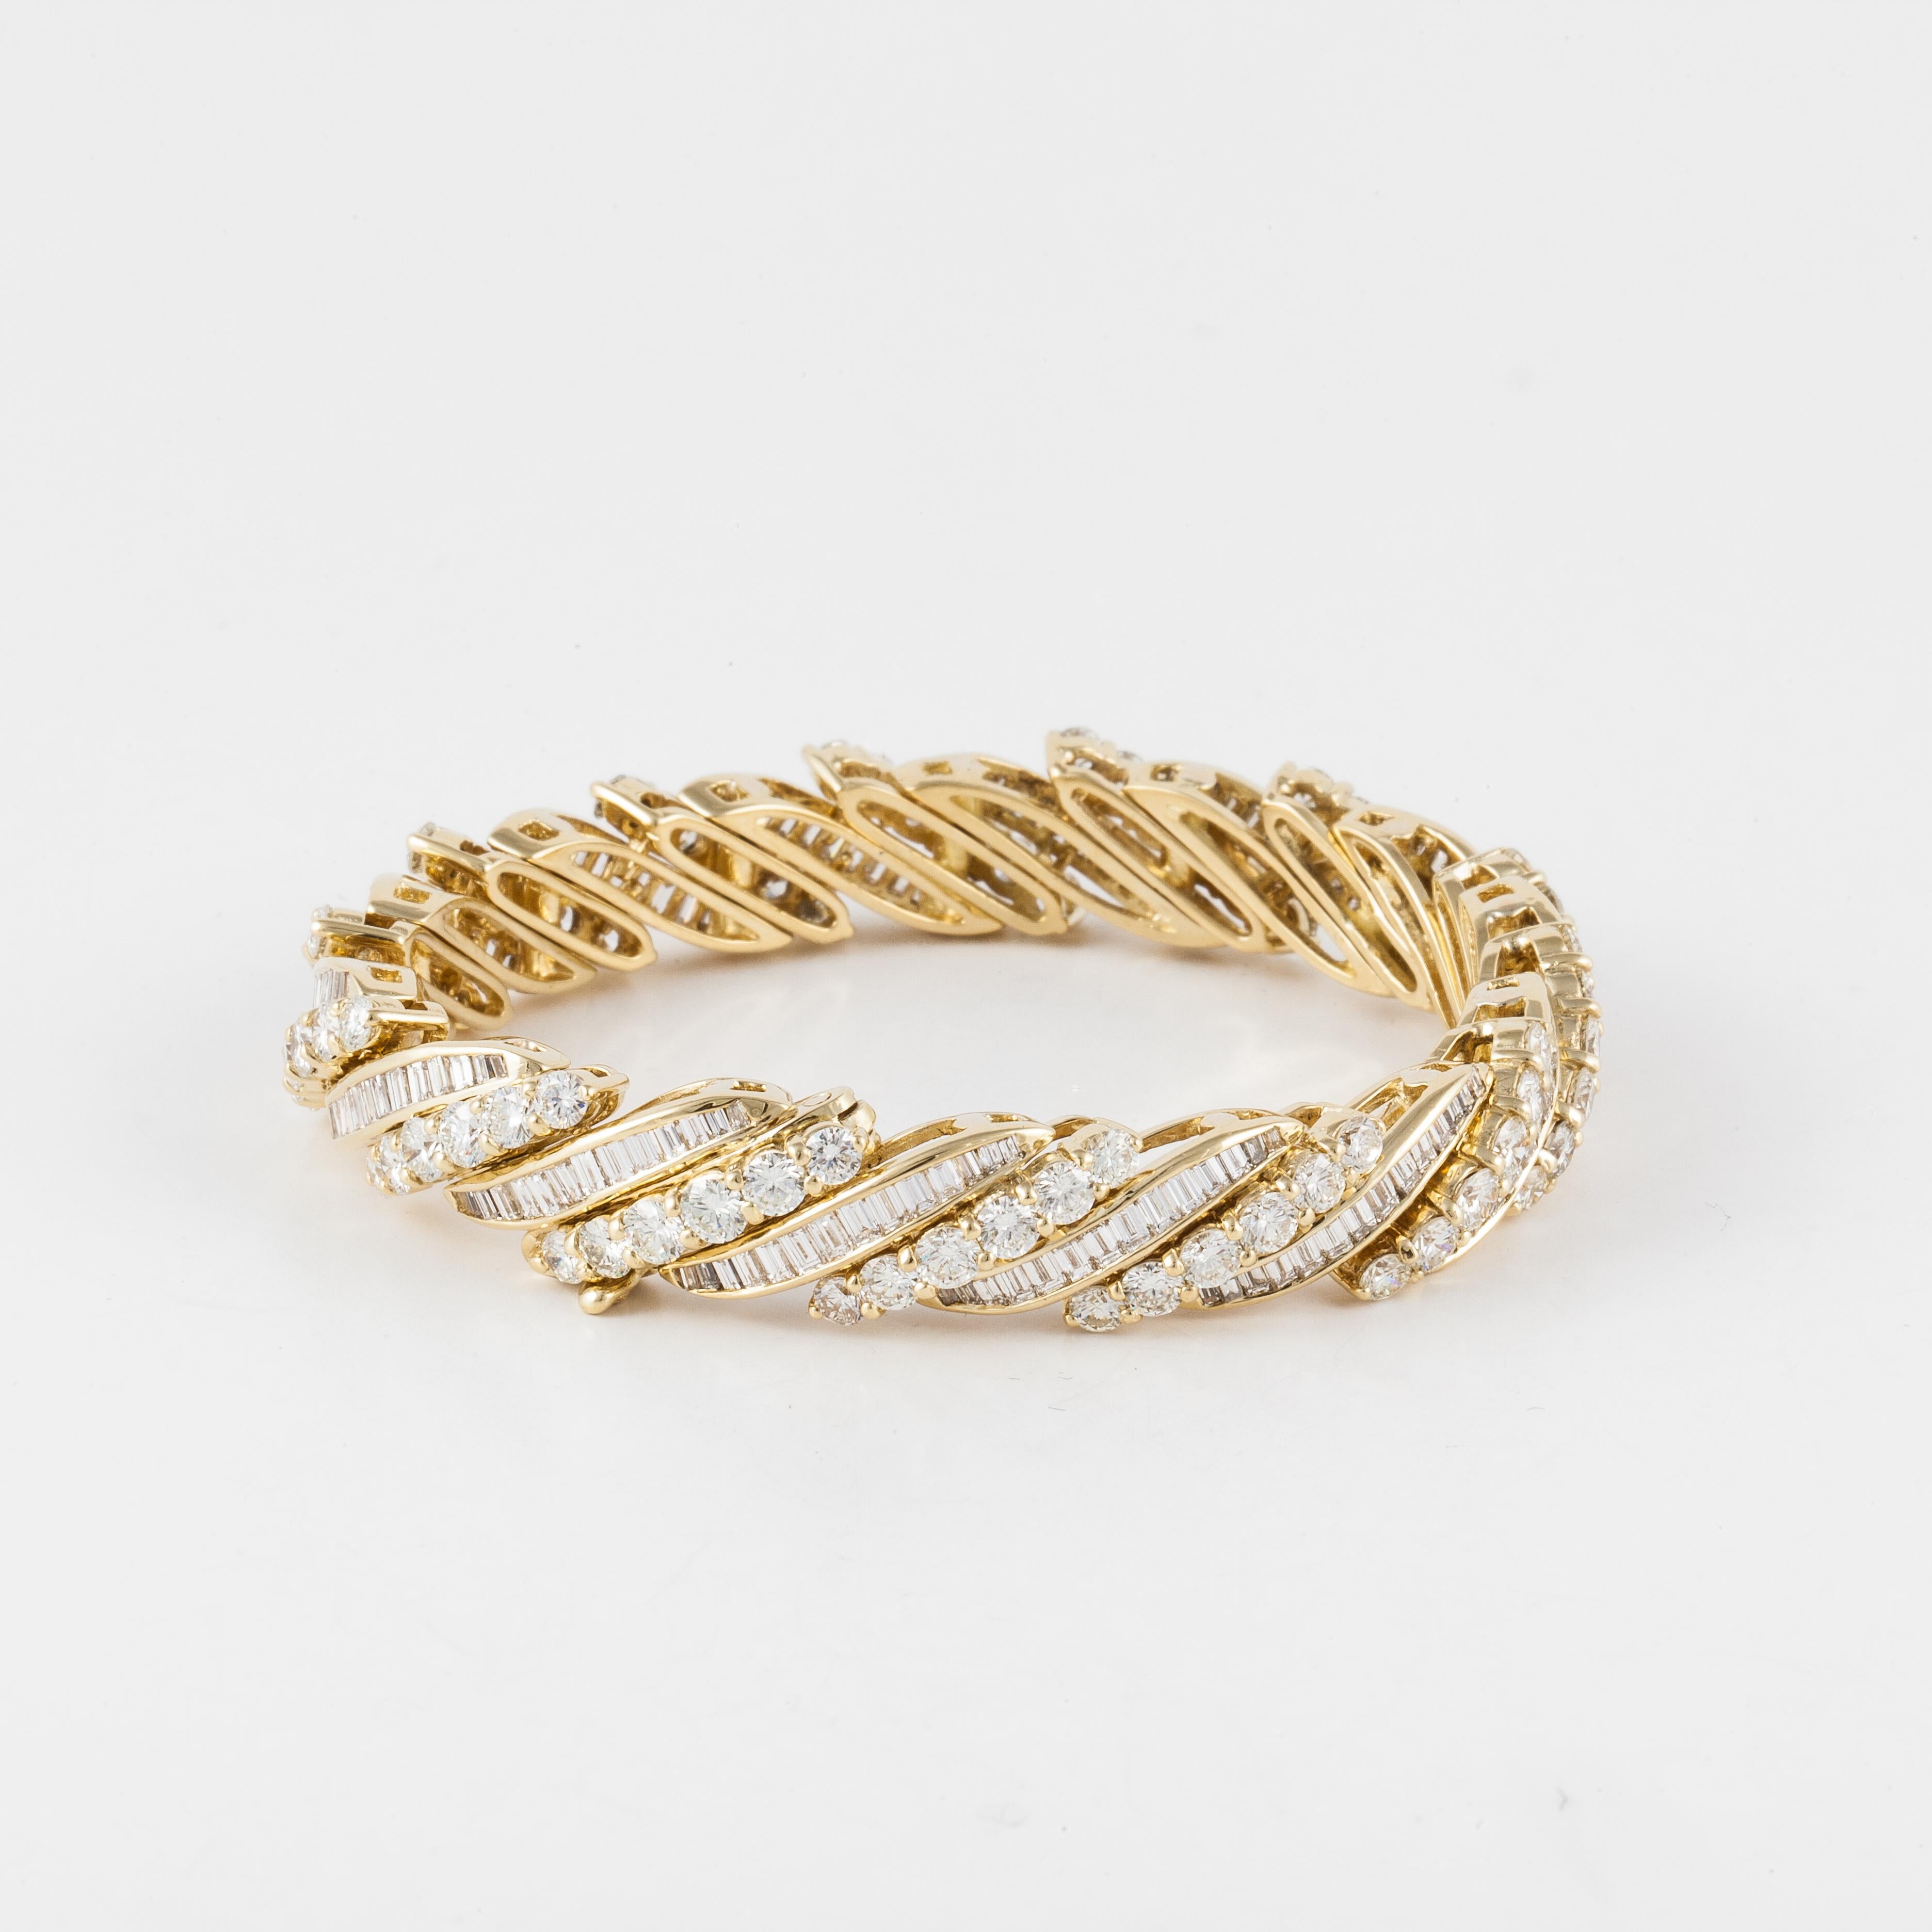 18K yellow gold bracelet featuring both round and baguette diamonds.  There are 84 round diamonds totaling 9.8 carats and 196 baguette diamonds totaling 4.2 carats.  Total diamond weight is 14 carats; H-I color and VS-SI clarity.  Measures 7 inches